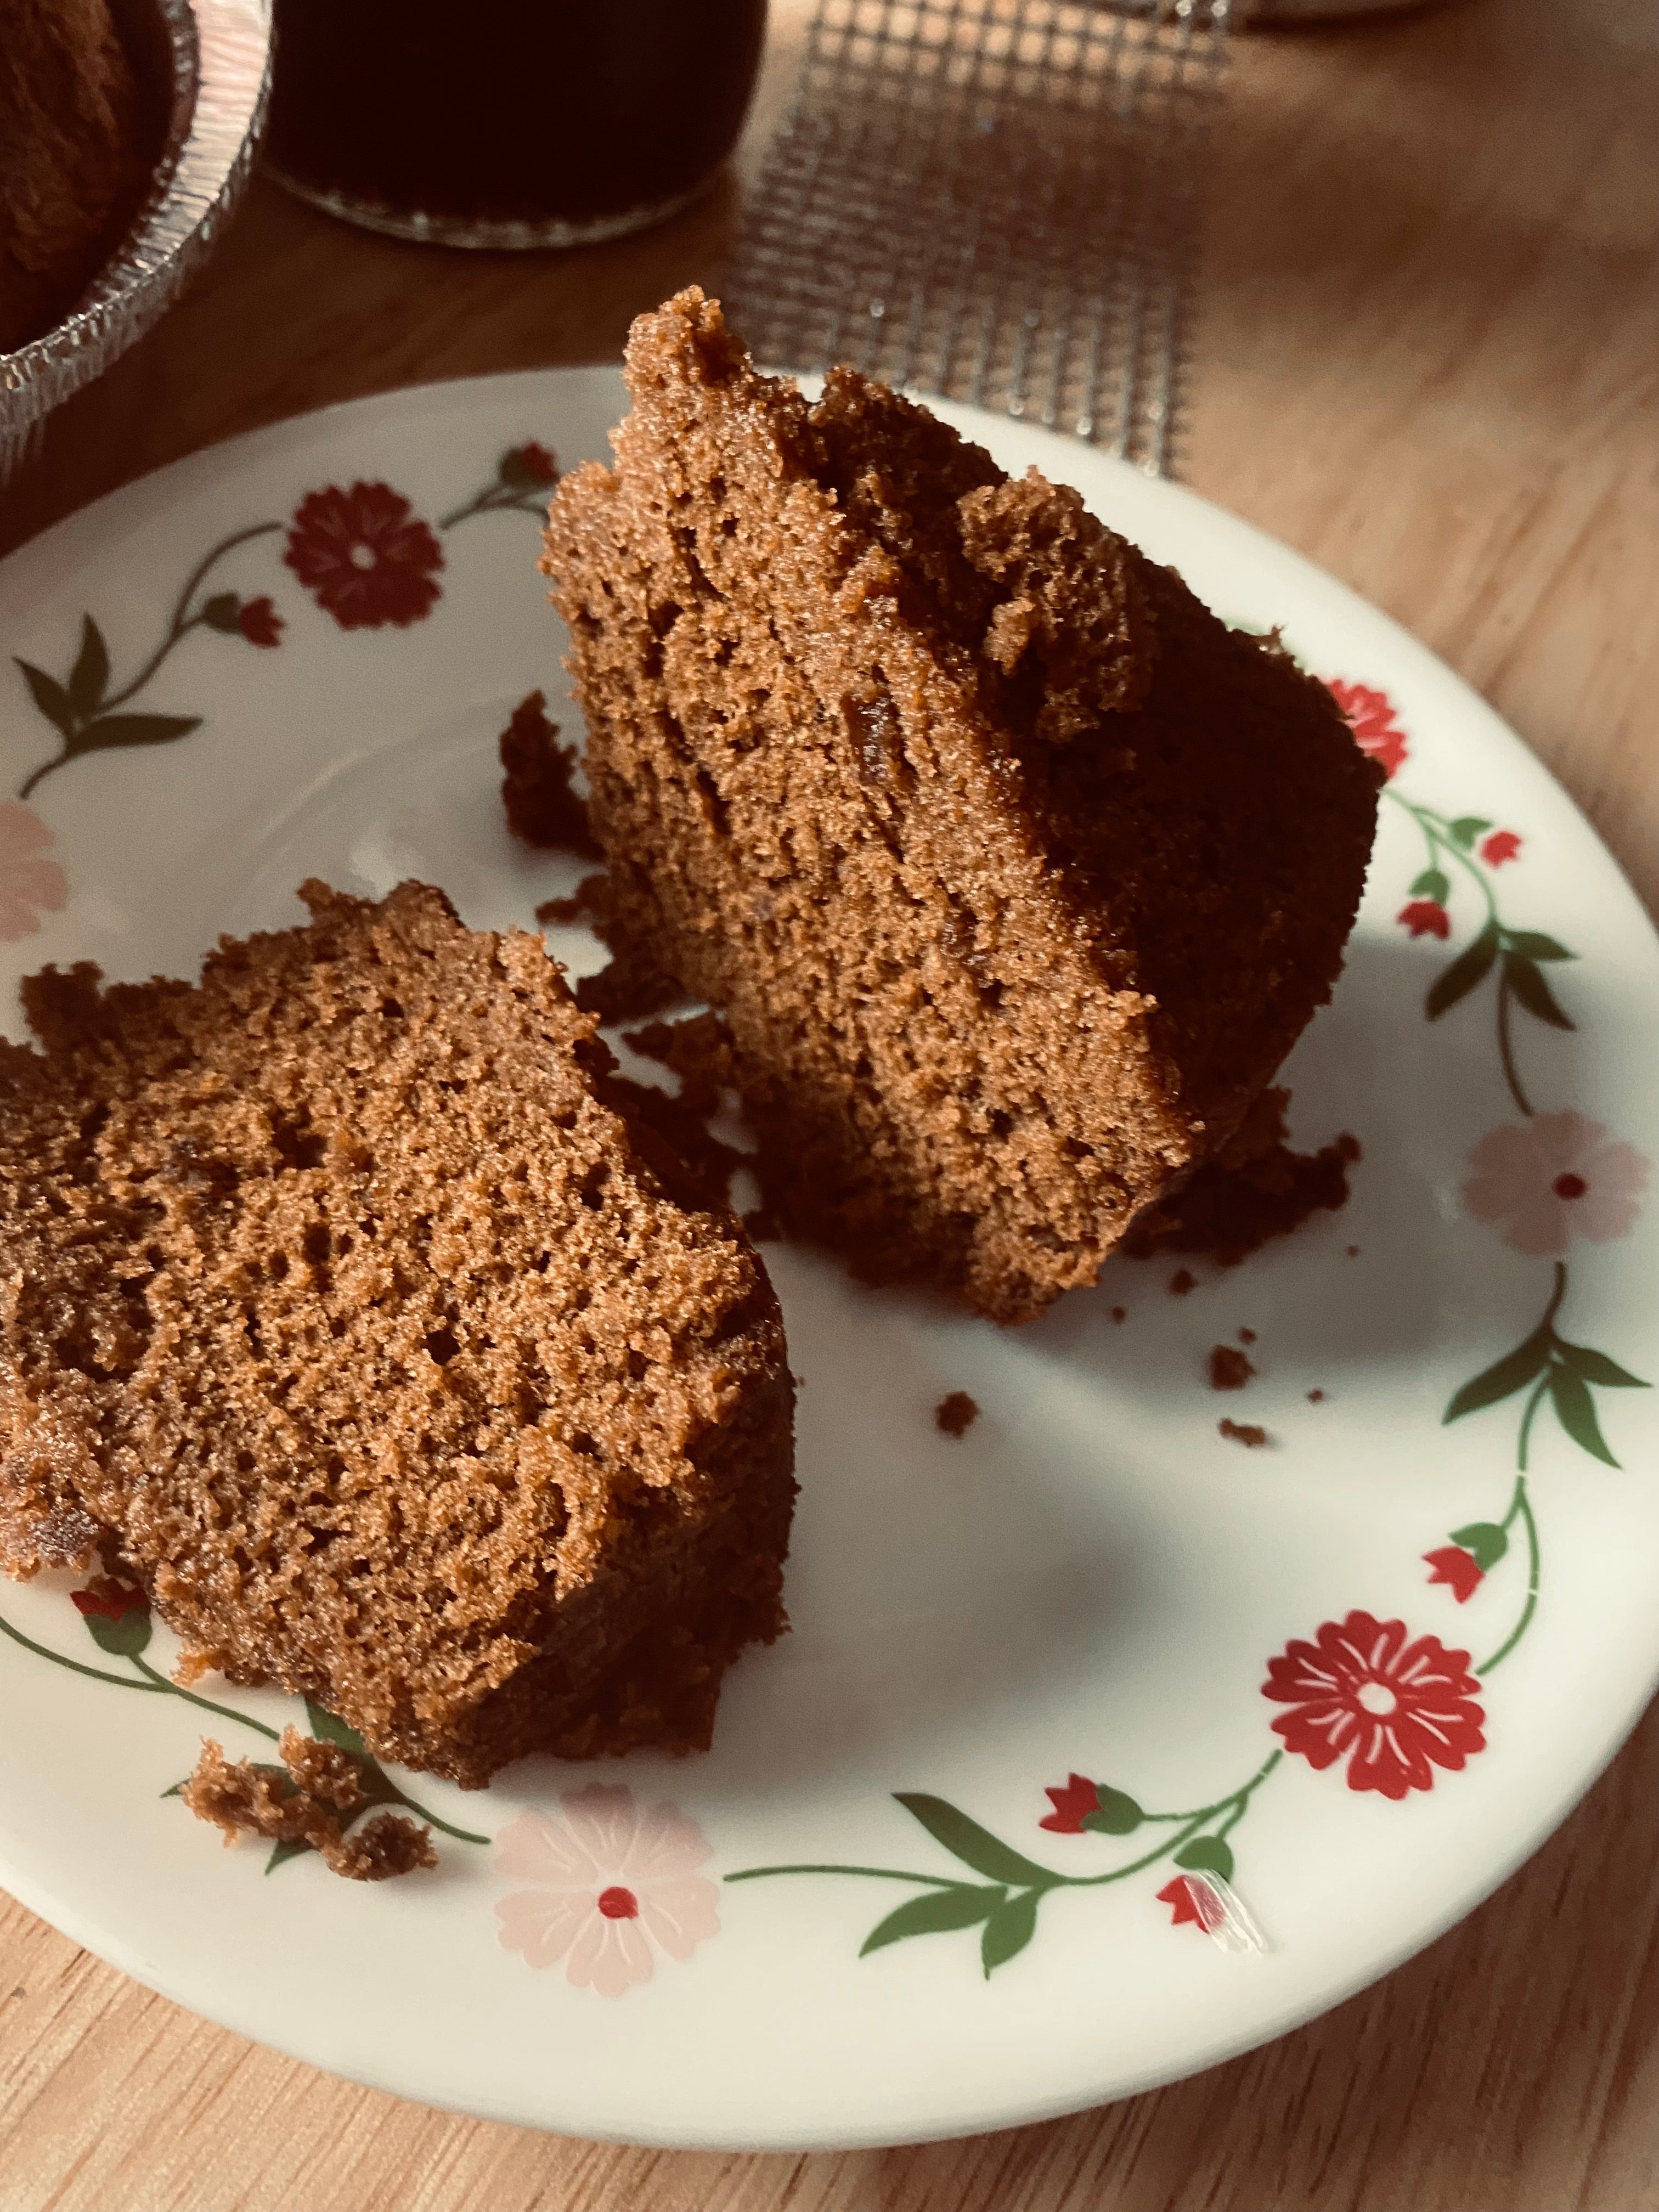 Jamaican Rum Cake/ Black Cake/ Christmas Cake In Food and Kitchen